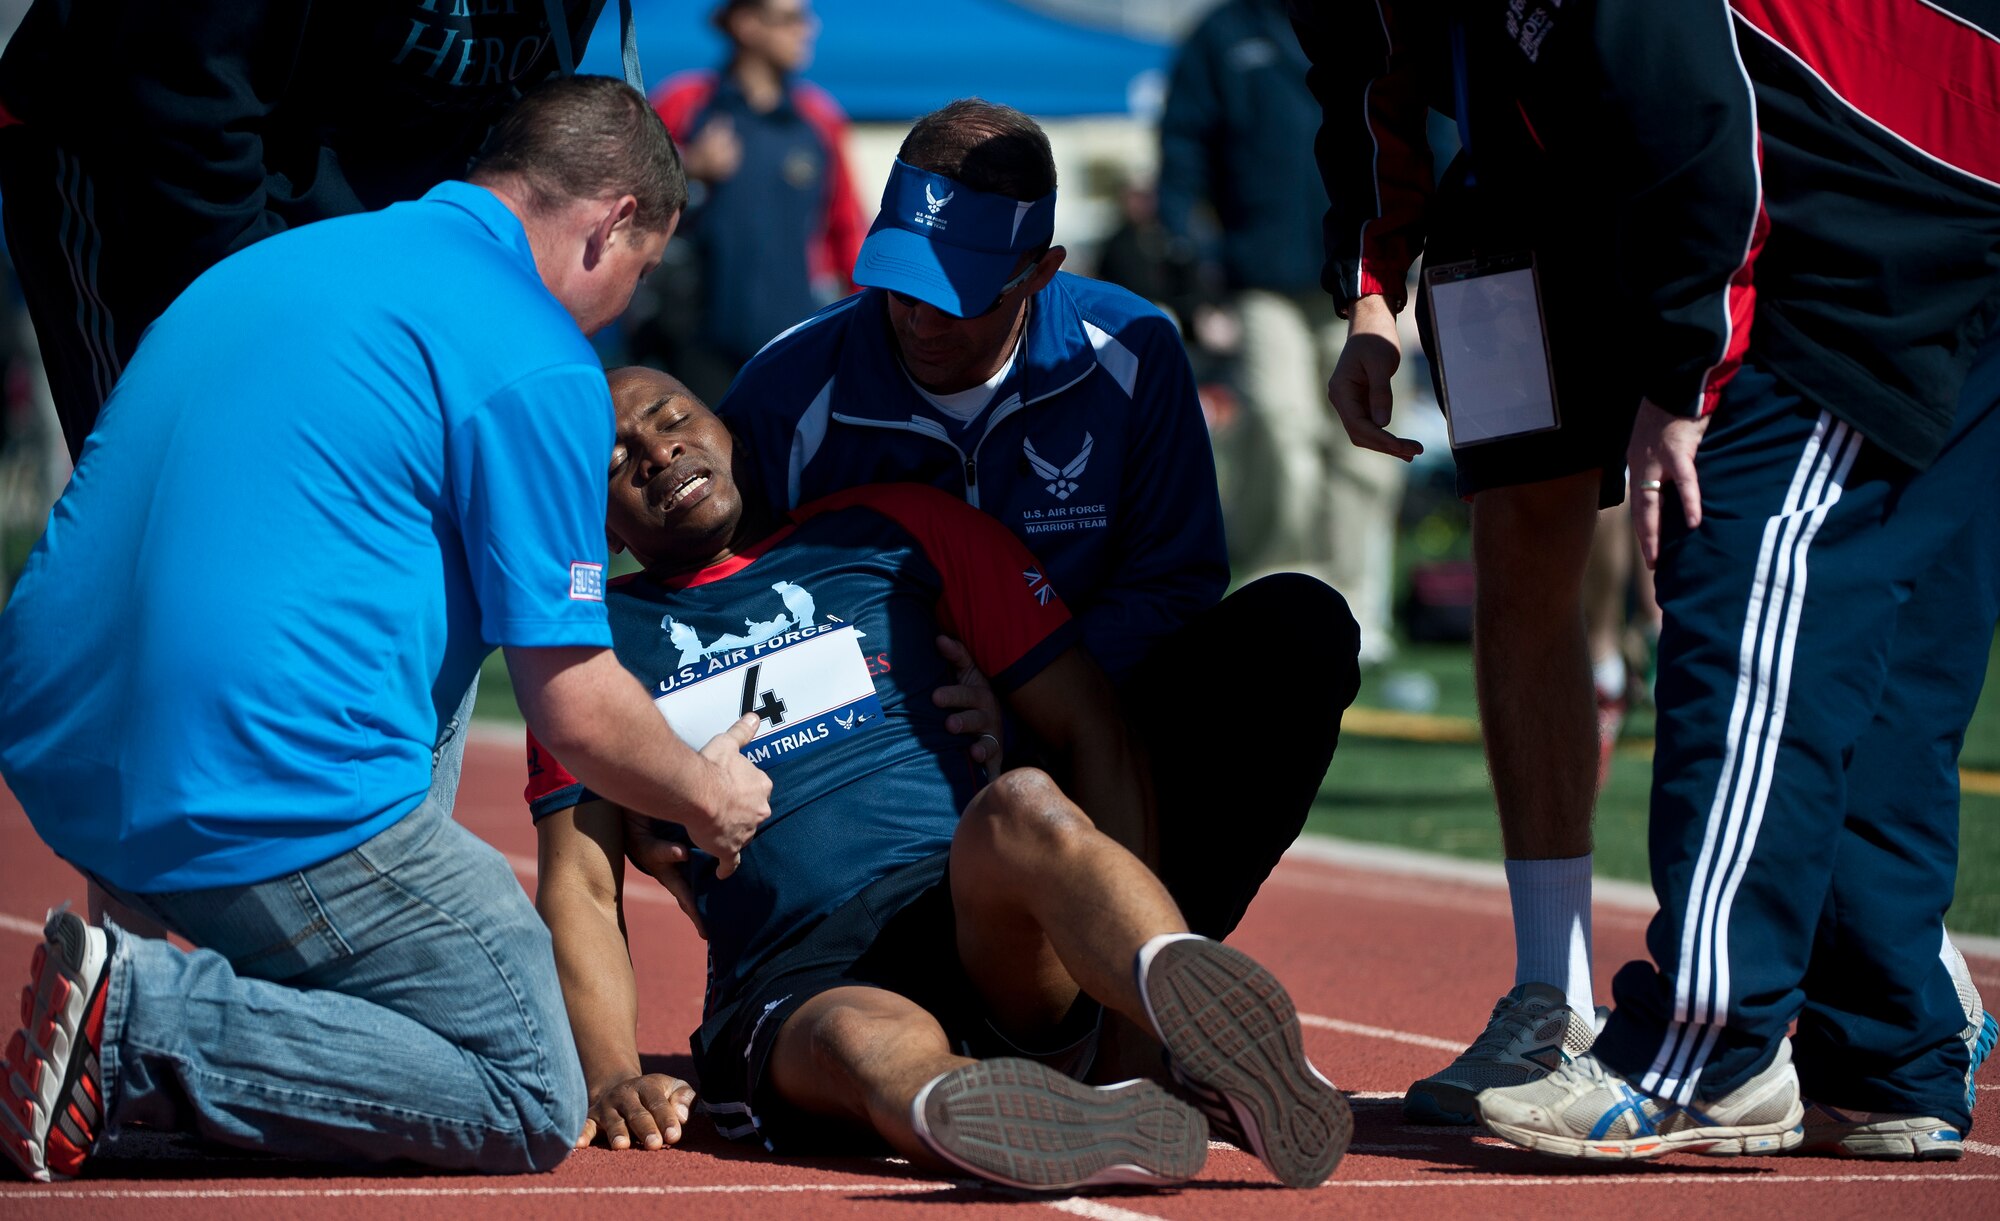 A member of the 2015 U.S. Air Force Trials British track team is consulted by members of the Air Force Trials staff after falling at the end of a 100-meter race at Nellis Air Force Base, Nev., March 3, 2015. More than 200 members of Nellis and Creech AFBs volunteered to help out during the trials, which will run Feb. 27 to March 5. (U.S. Air Force photo by Staff Sgt. Siuta B. Ika)